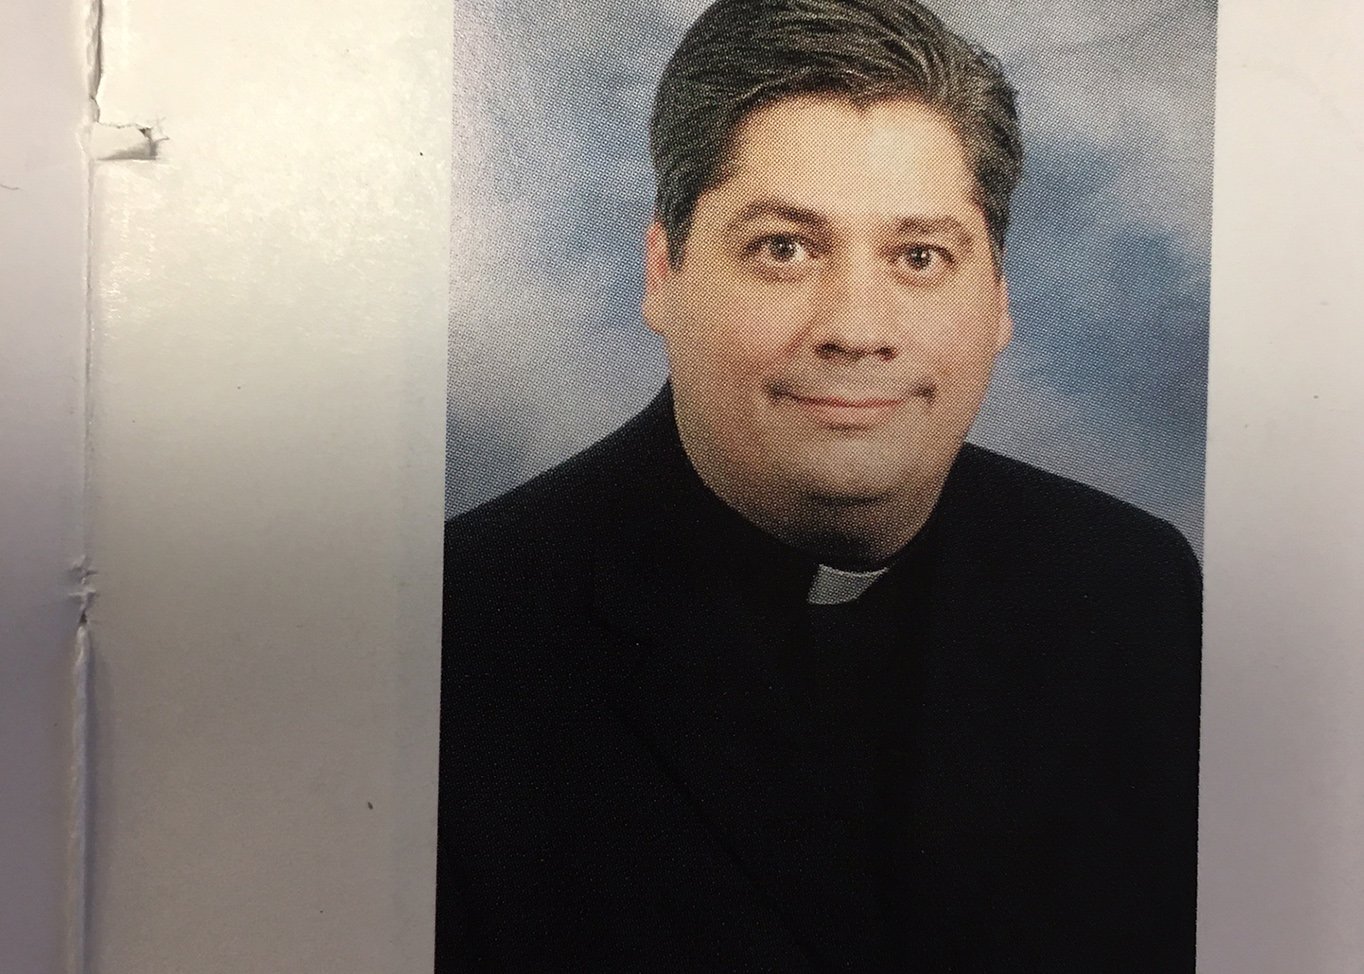 Father John S. Bonnici, a New York archdiocesan priest, is seen in a clergy book from 2009. (CNS photo/John Woods, Catholic New York)